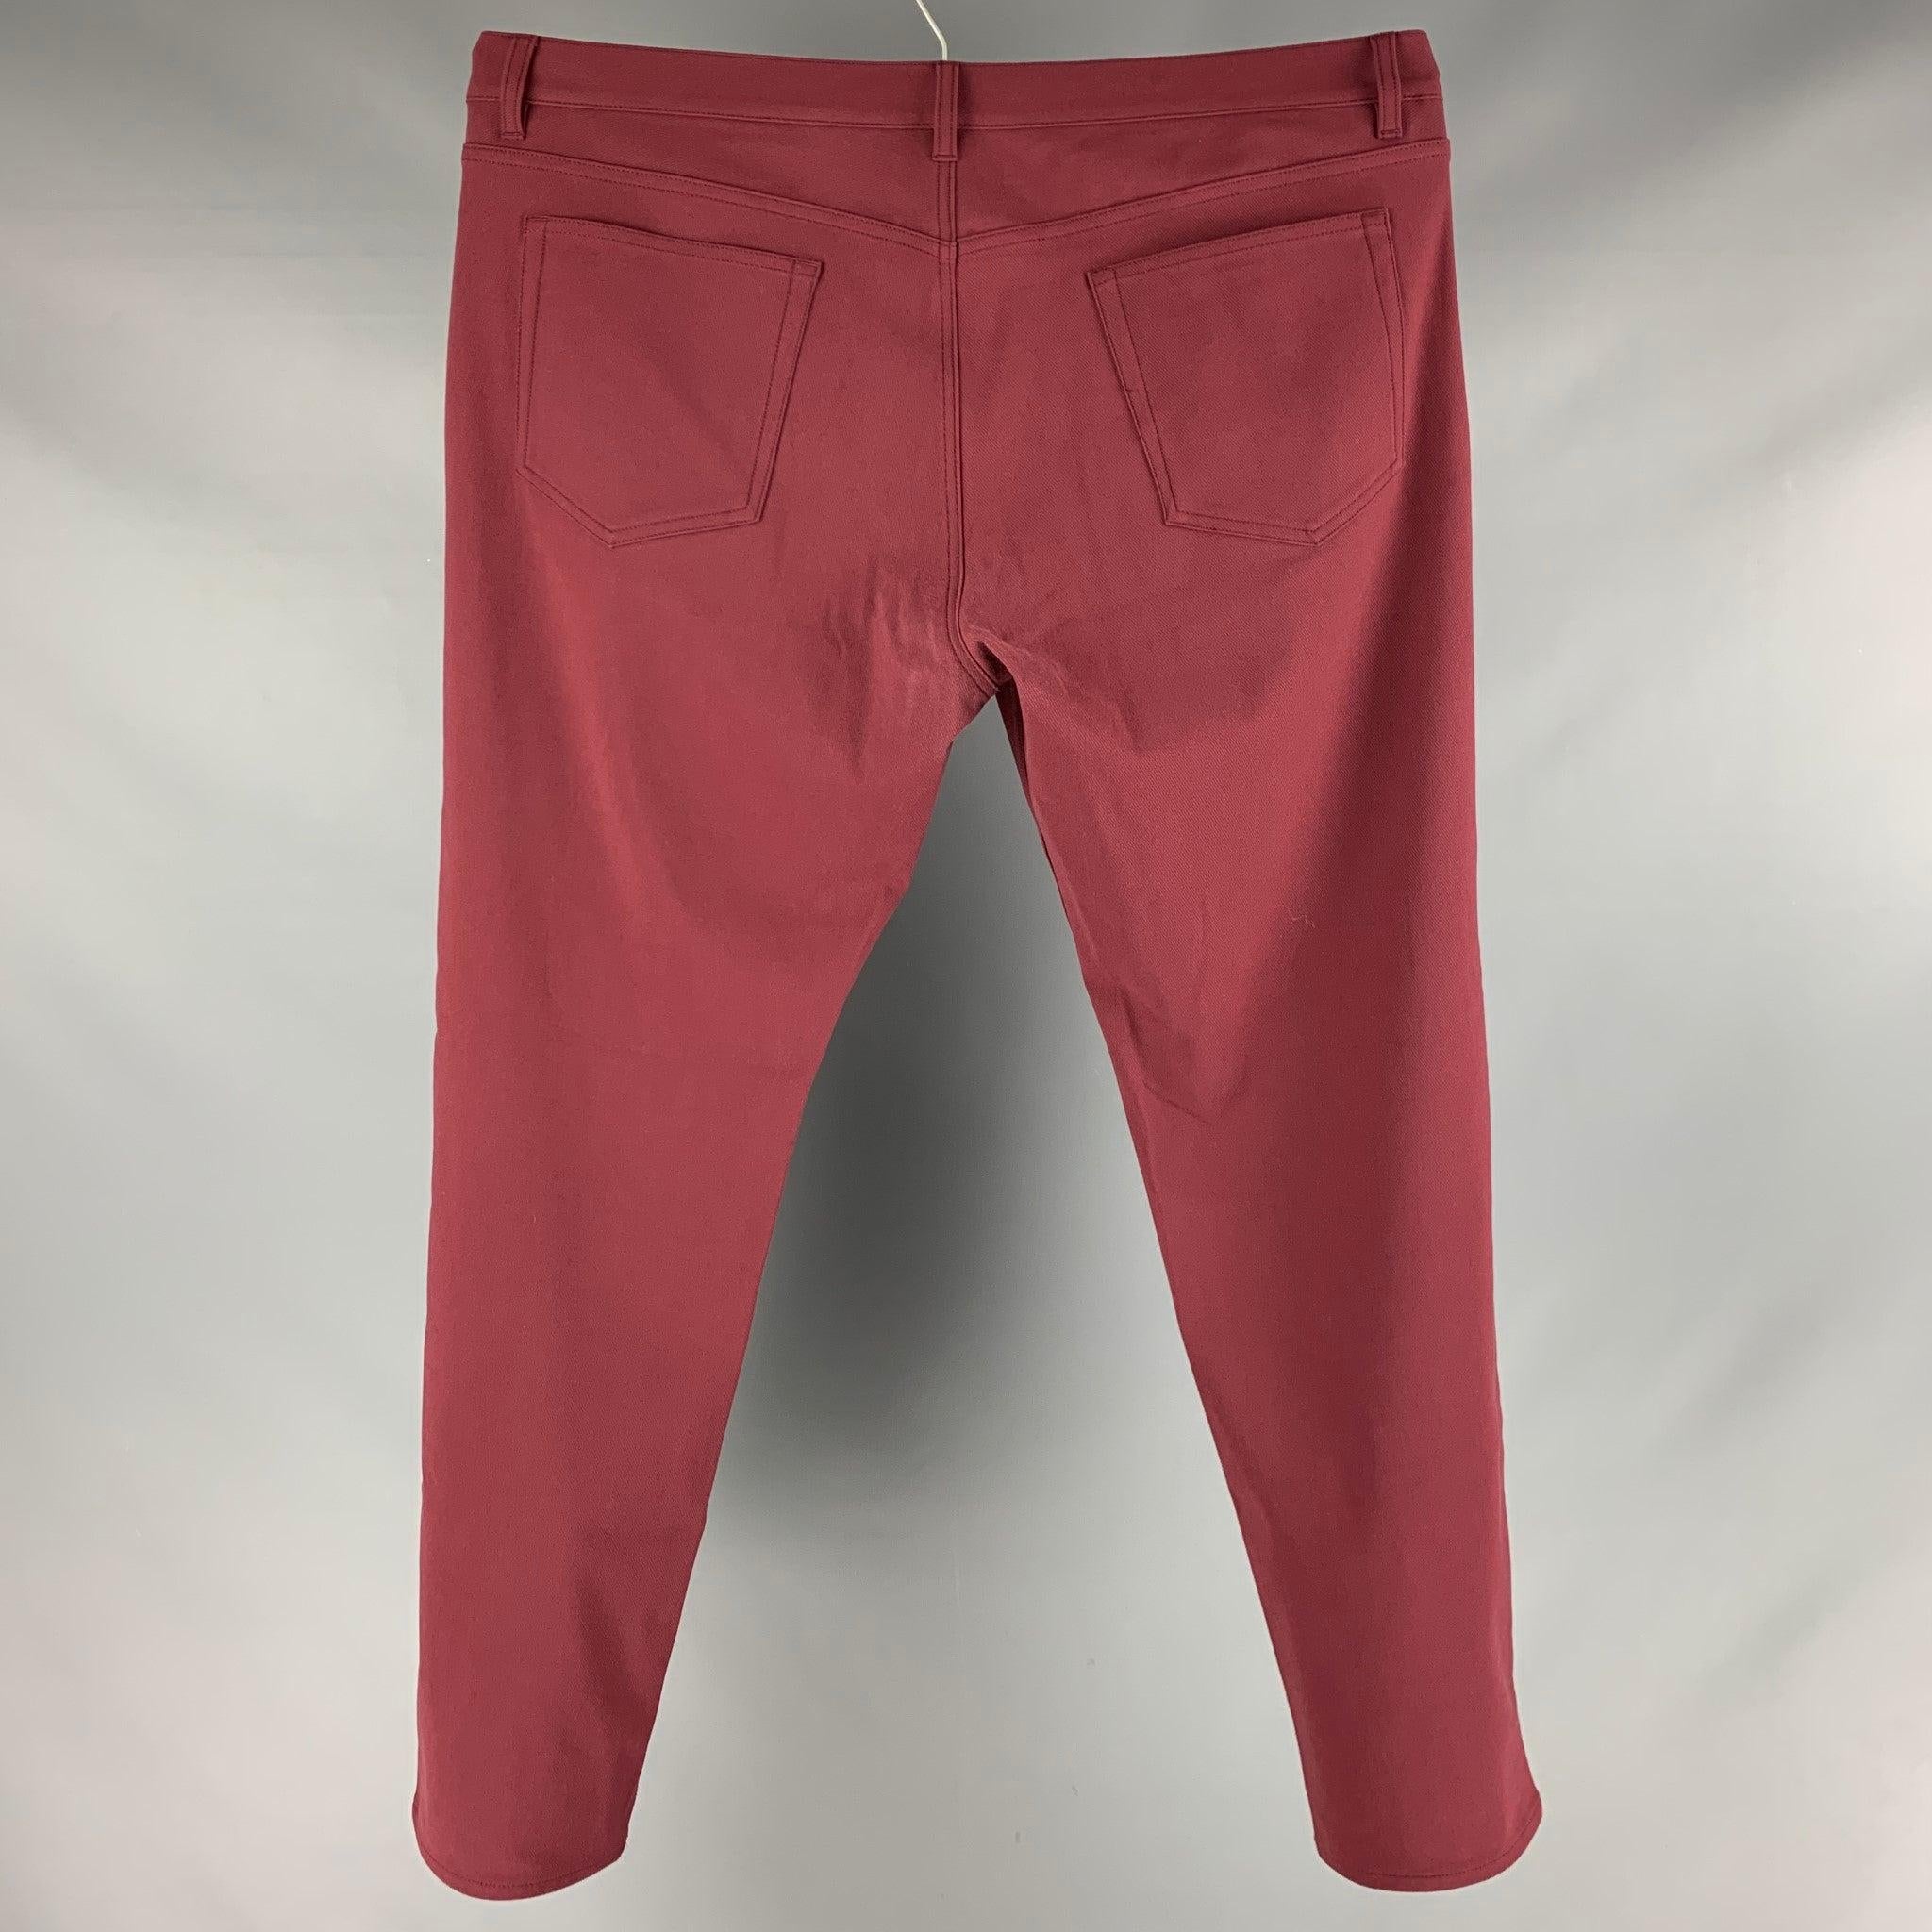 THEORY casual pants comes in a burgundy twill featuring a flat front and a zip fly closure.Excellent Pre- Owned Material. 

Marked:   40 

Measurements: 
  Waist: 43 inches Rise: 10.5 inches Inseam: 31.5 inches 
 

  
  
 
Reference: